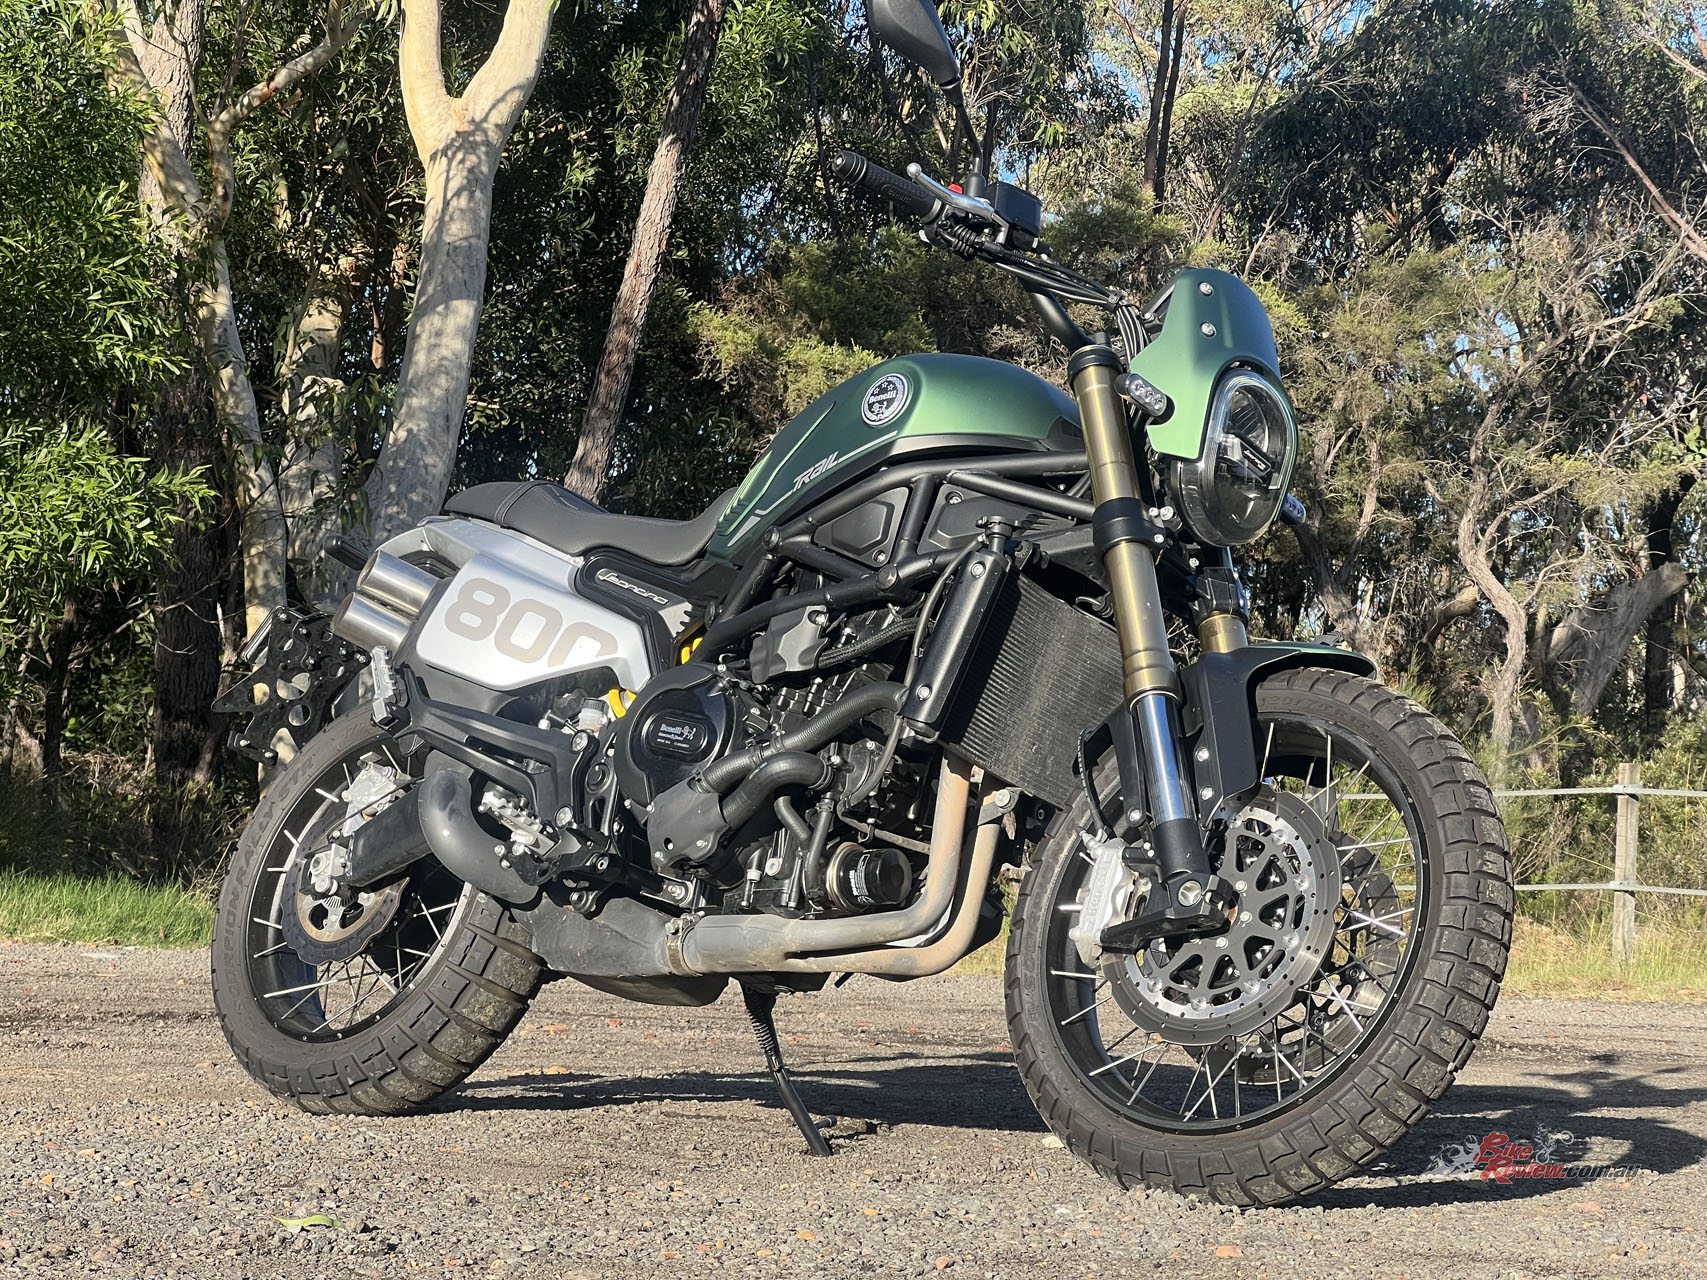 Month three already with the “Little Lion”! The Benelli Leoncino 800 Trail has been treating me well, I never thought I’d like it as much as I do now.